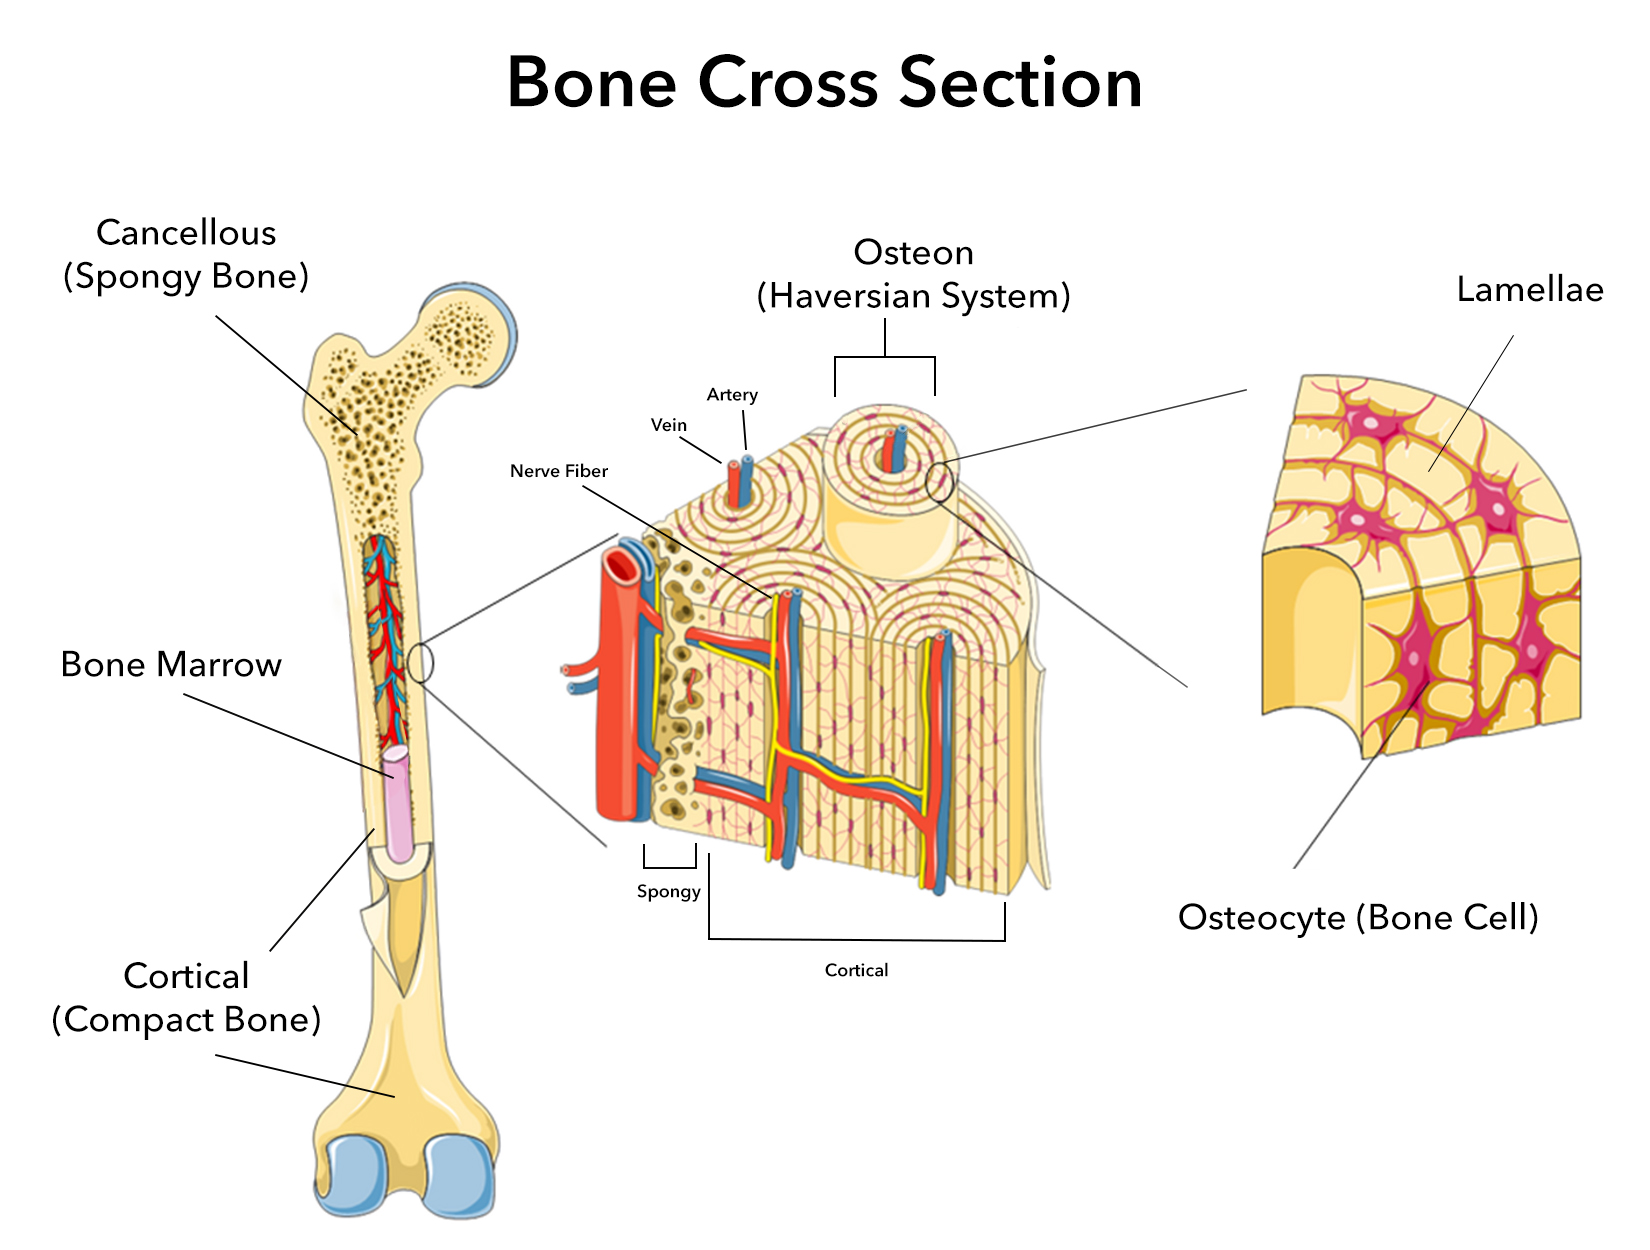 Femur/long bone cross section showing both cancellous and compact bone allocations.